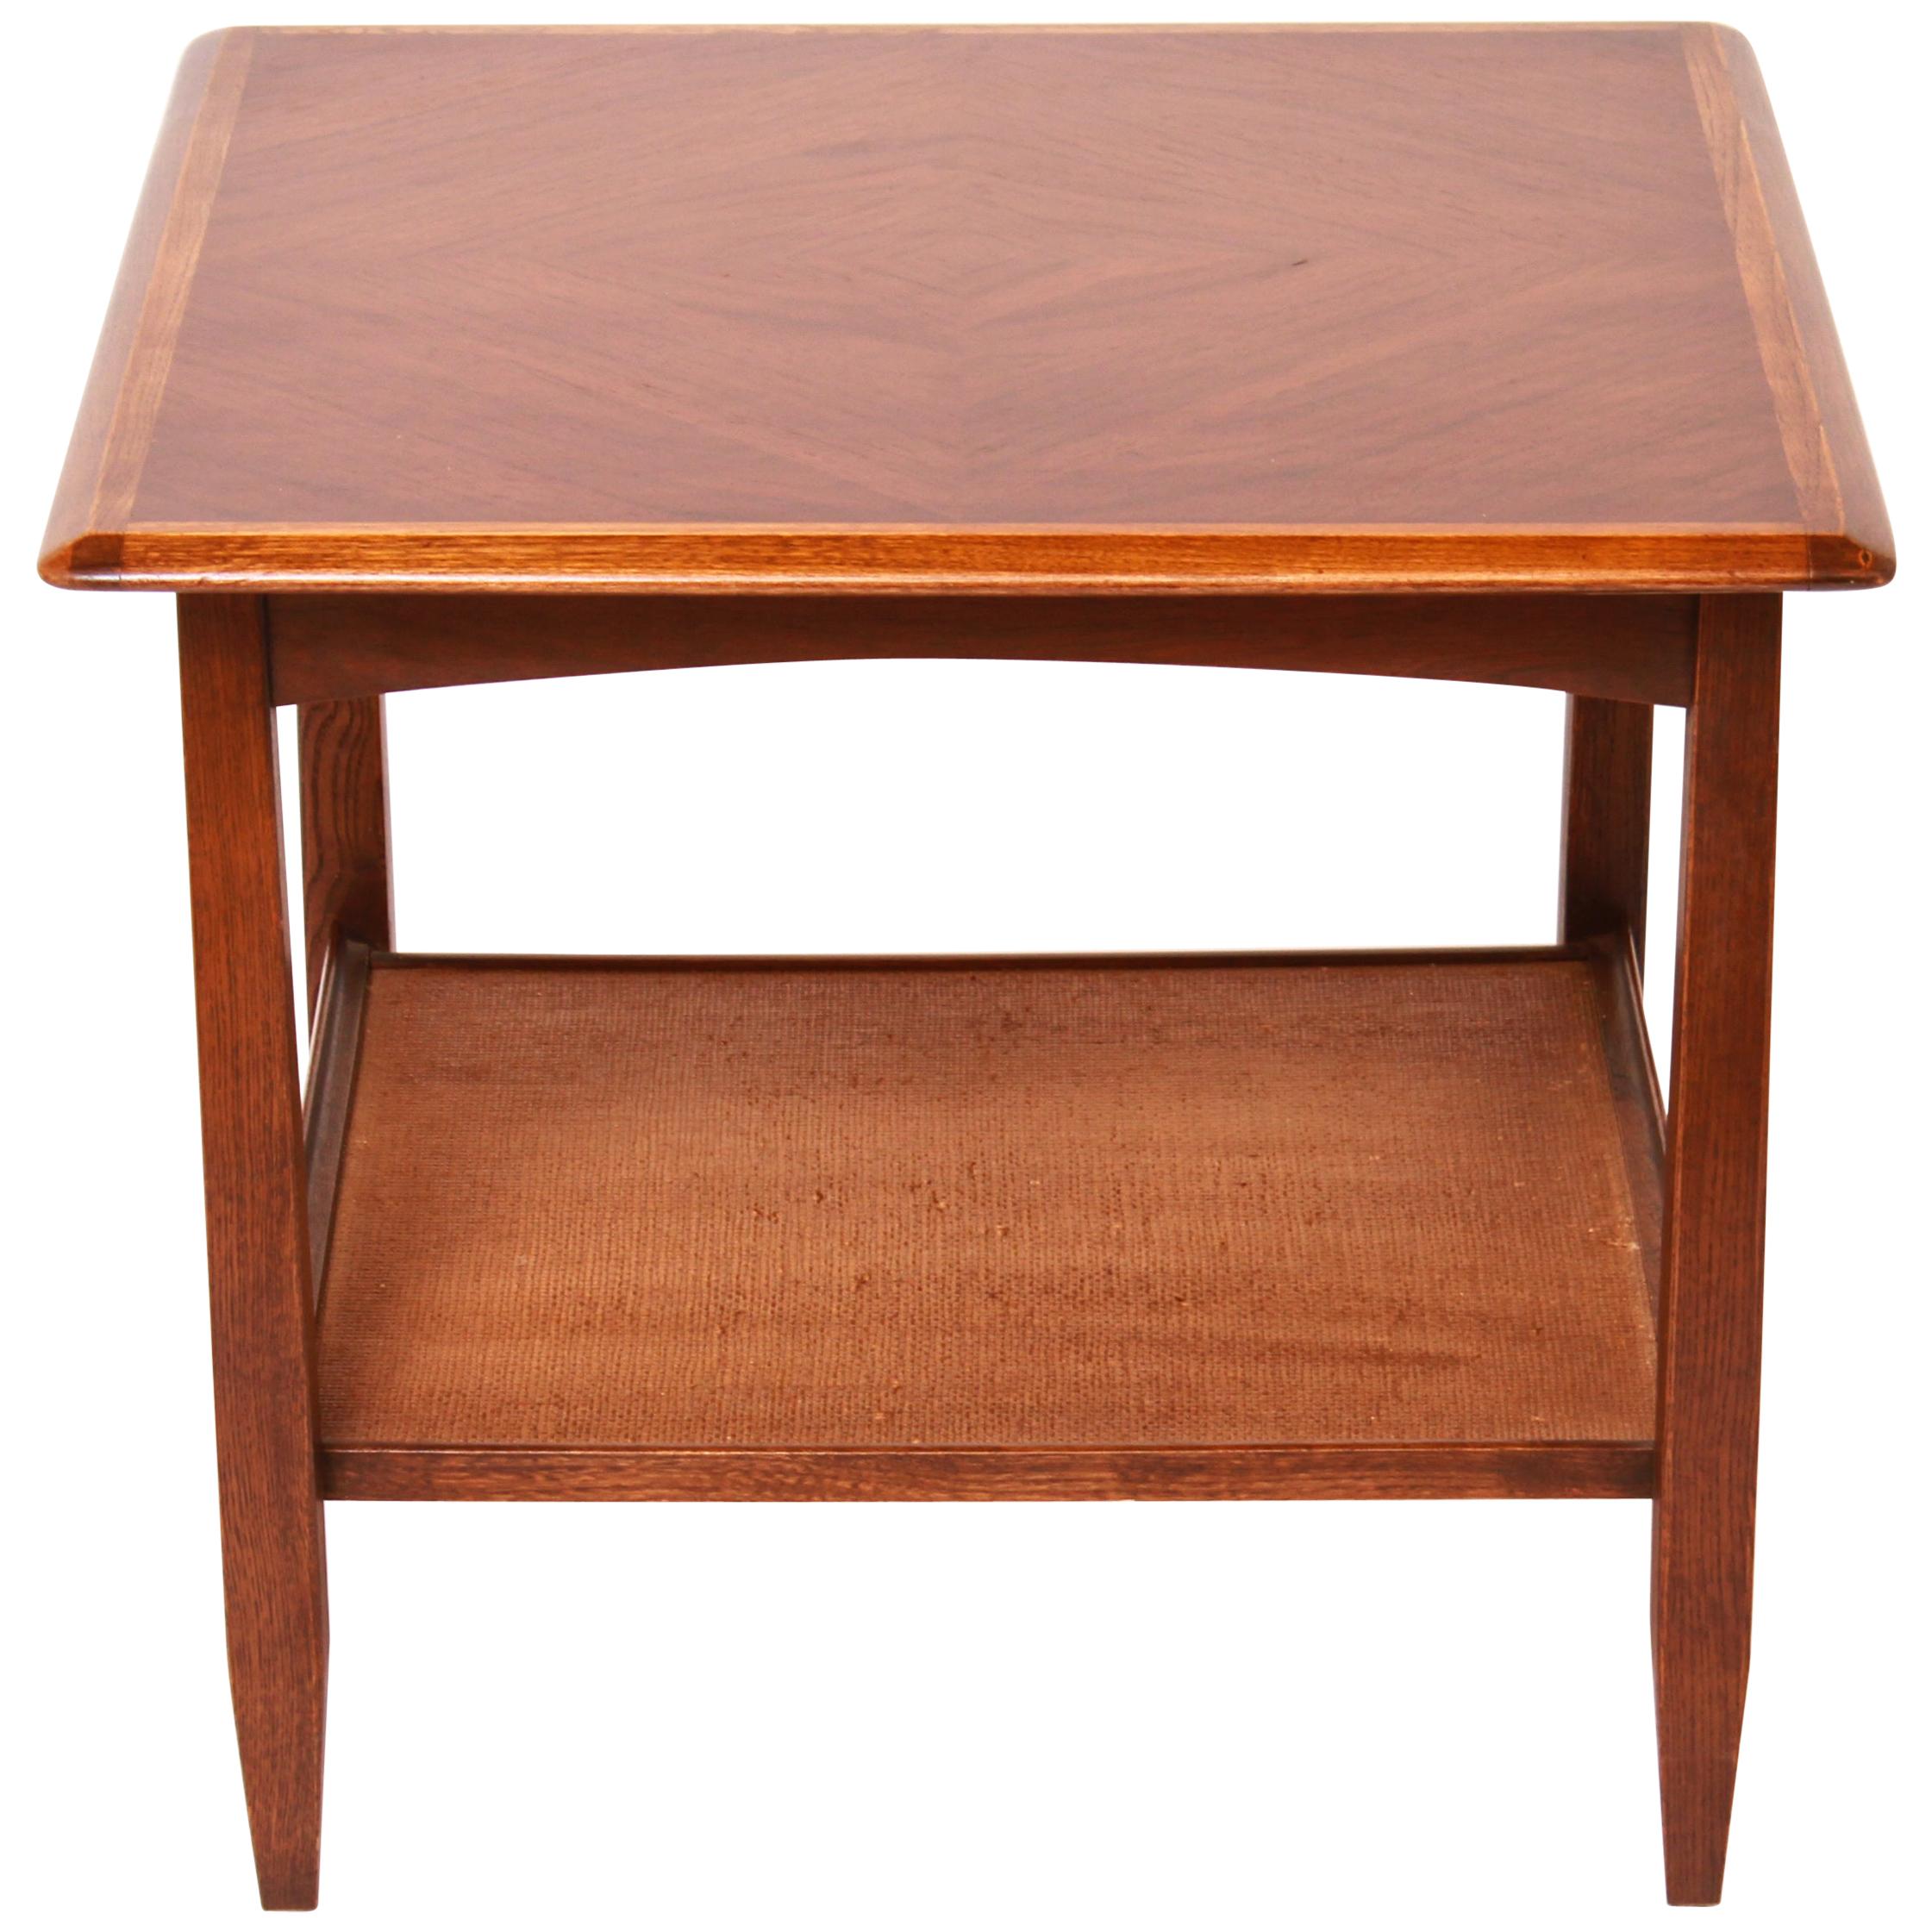 Bassett Furniture Mid-Century Modern Wood End Table with Rattan-Lined Shelf